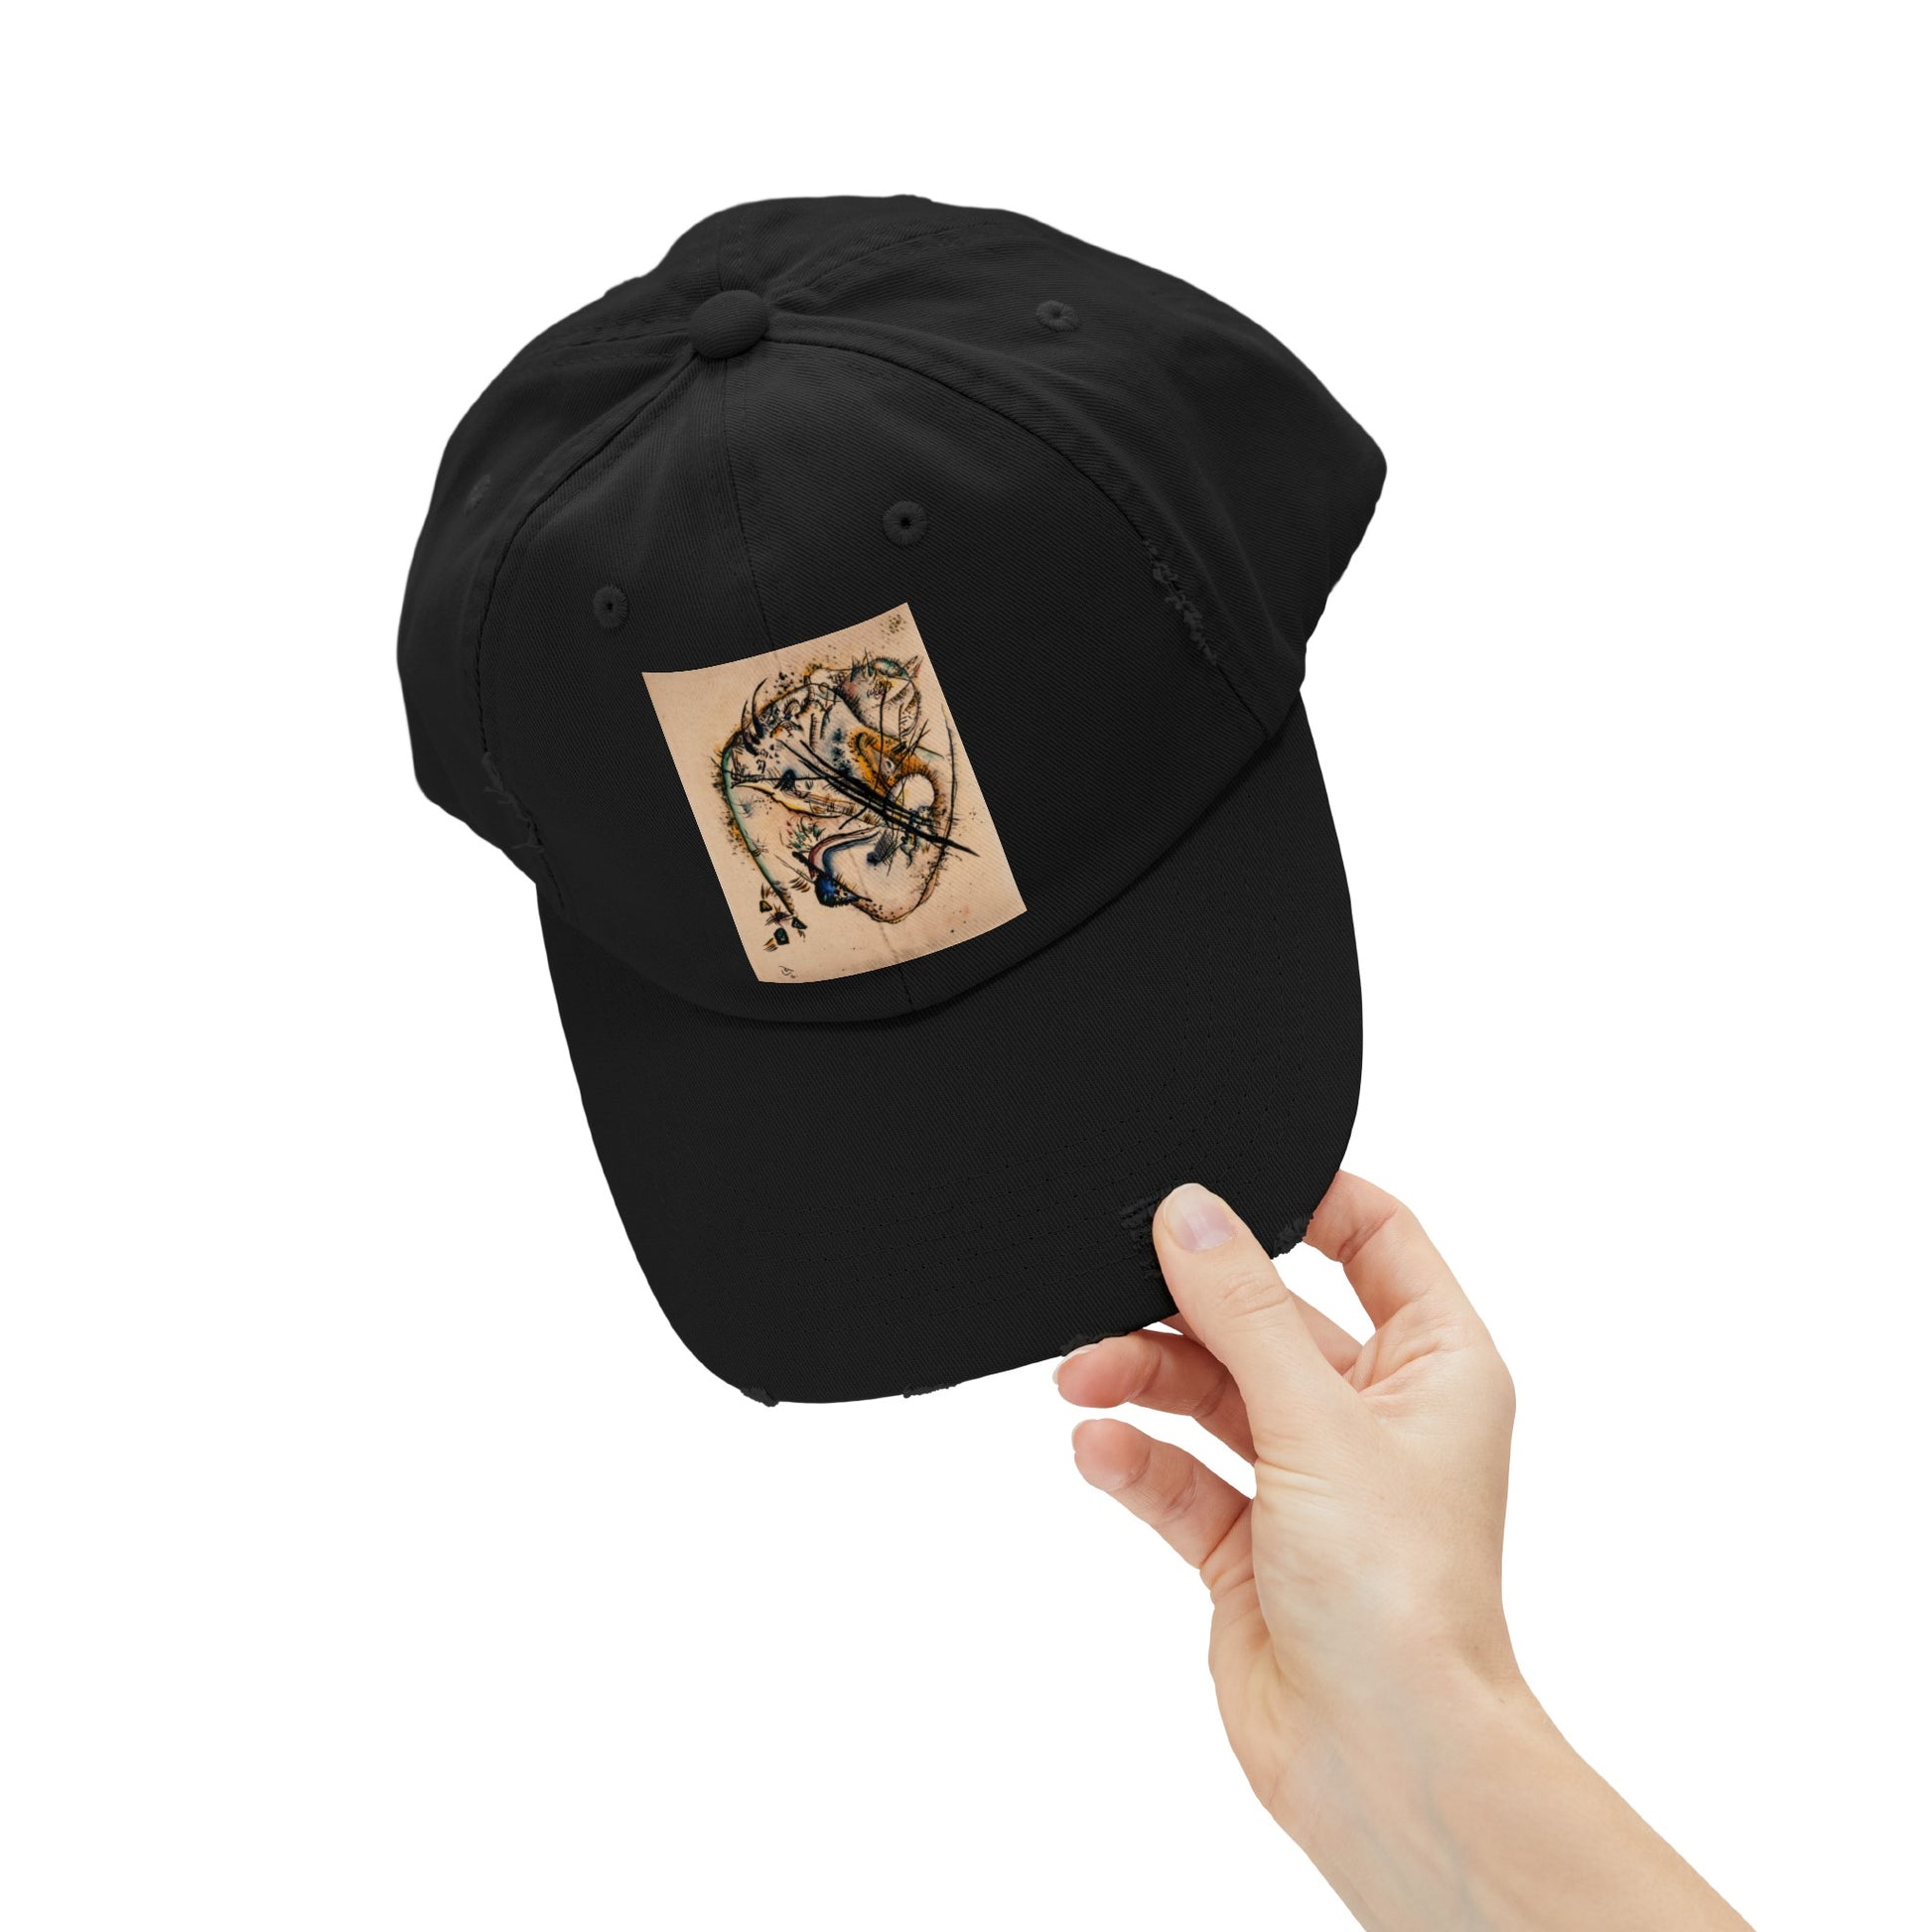 a person holding a black hat with a dragon on it